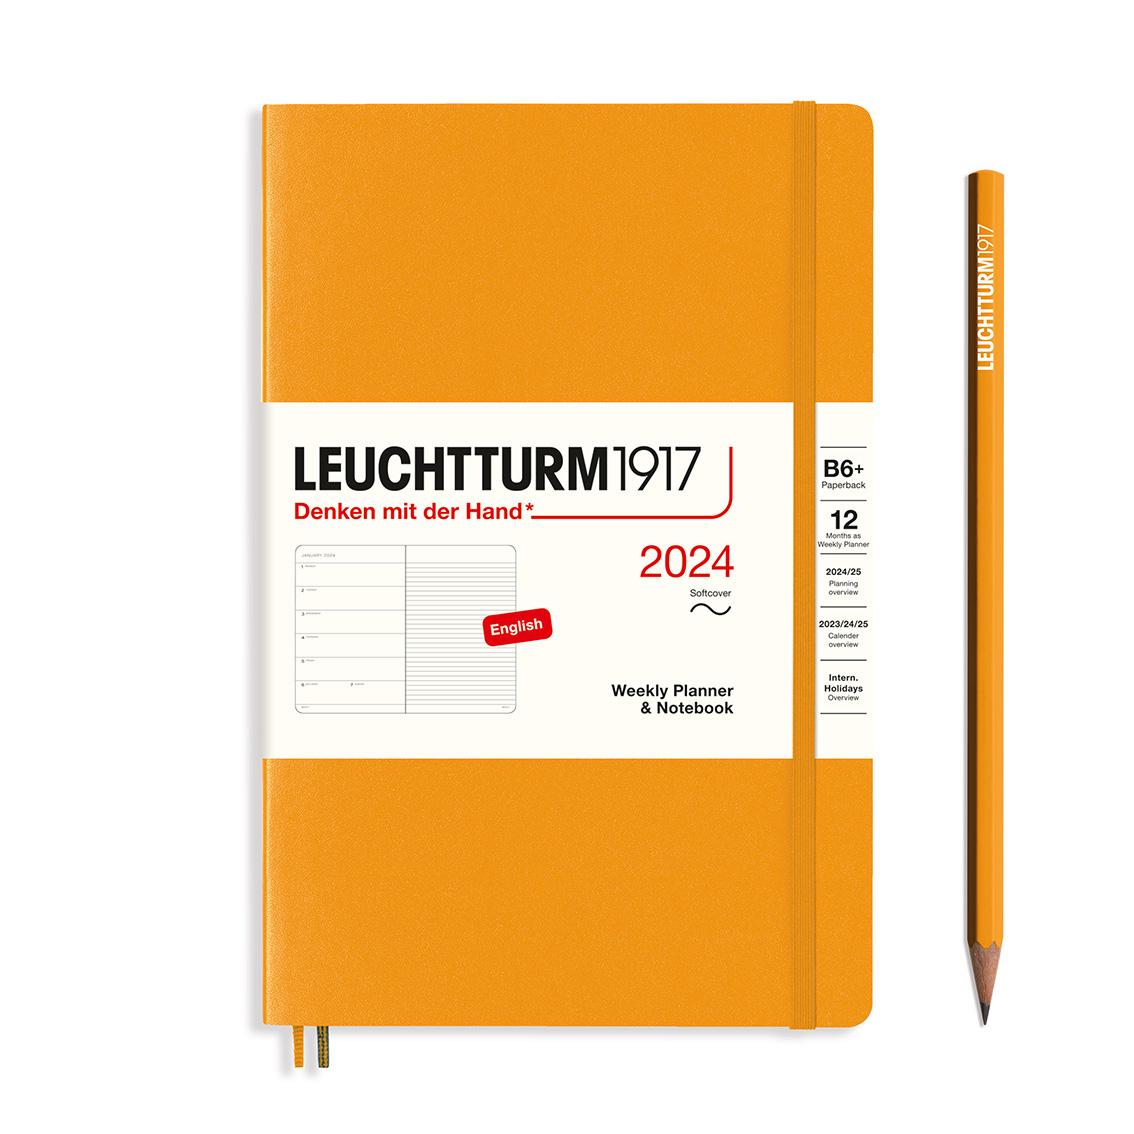 softcover weekly planner and notebook B6+ rising sun by Leuchtturm1917